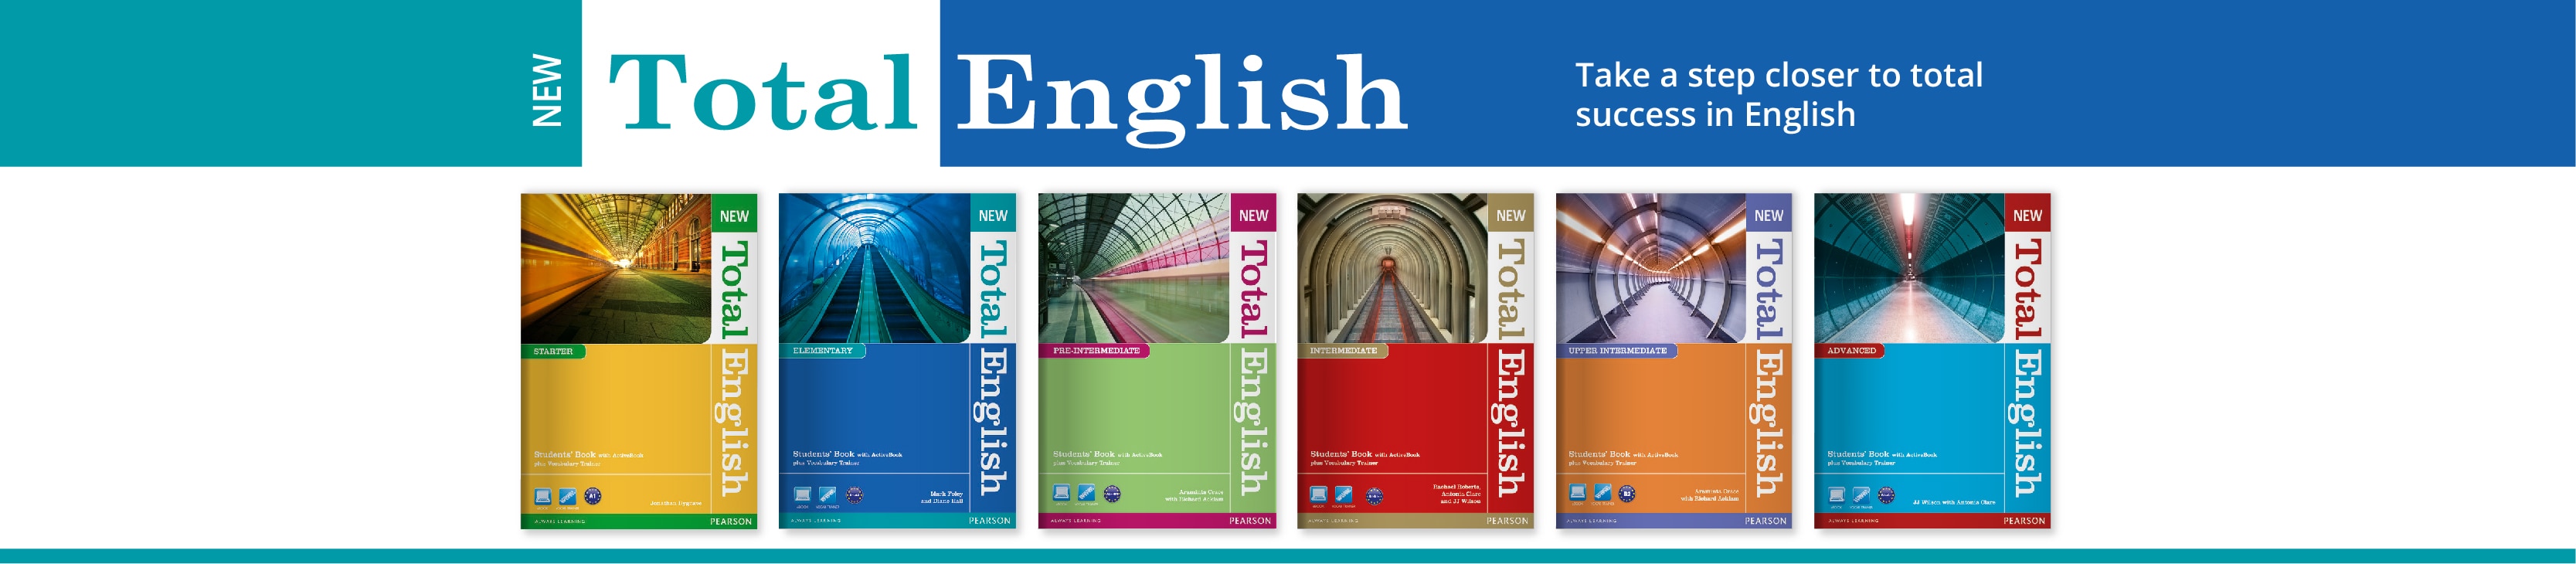 New Total English Worksheets